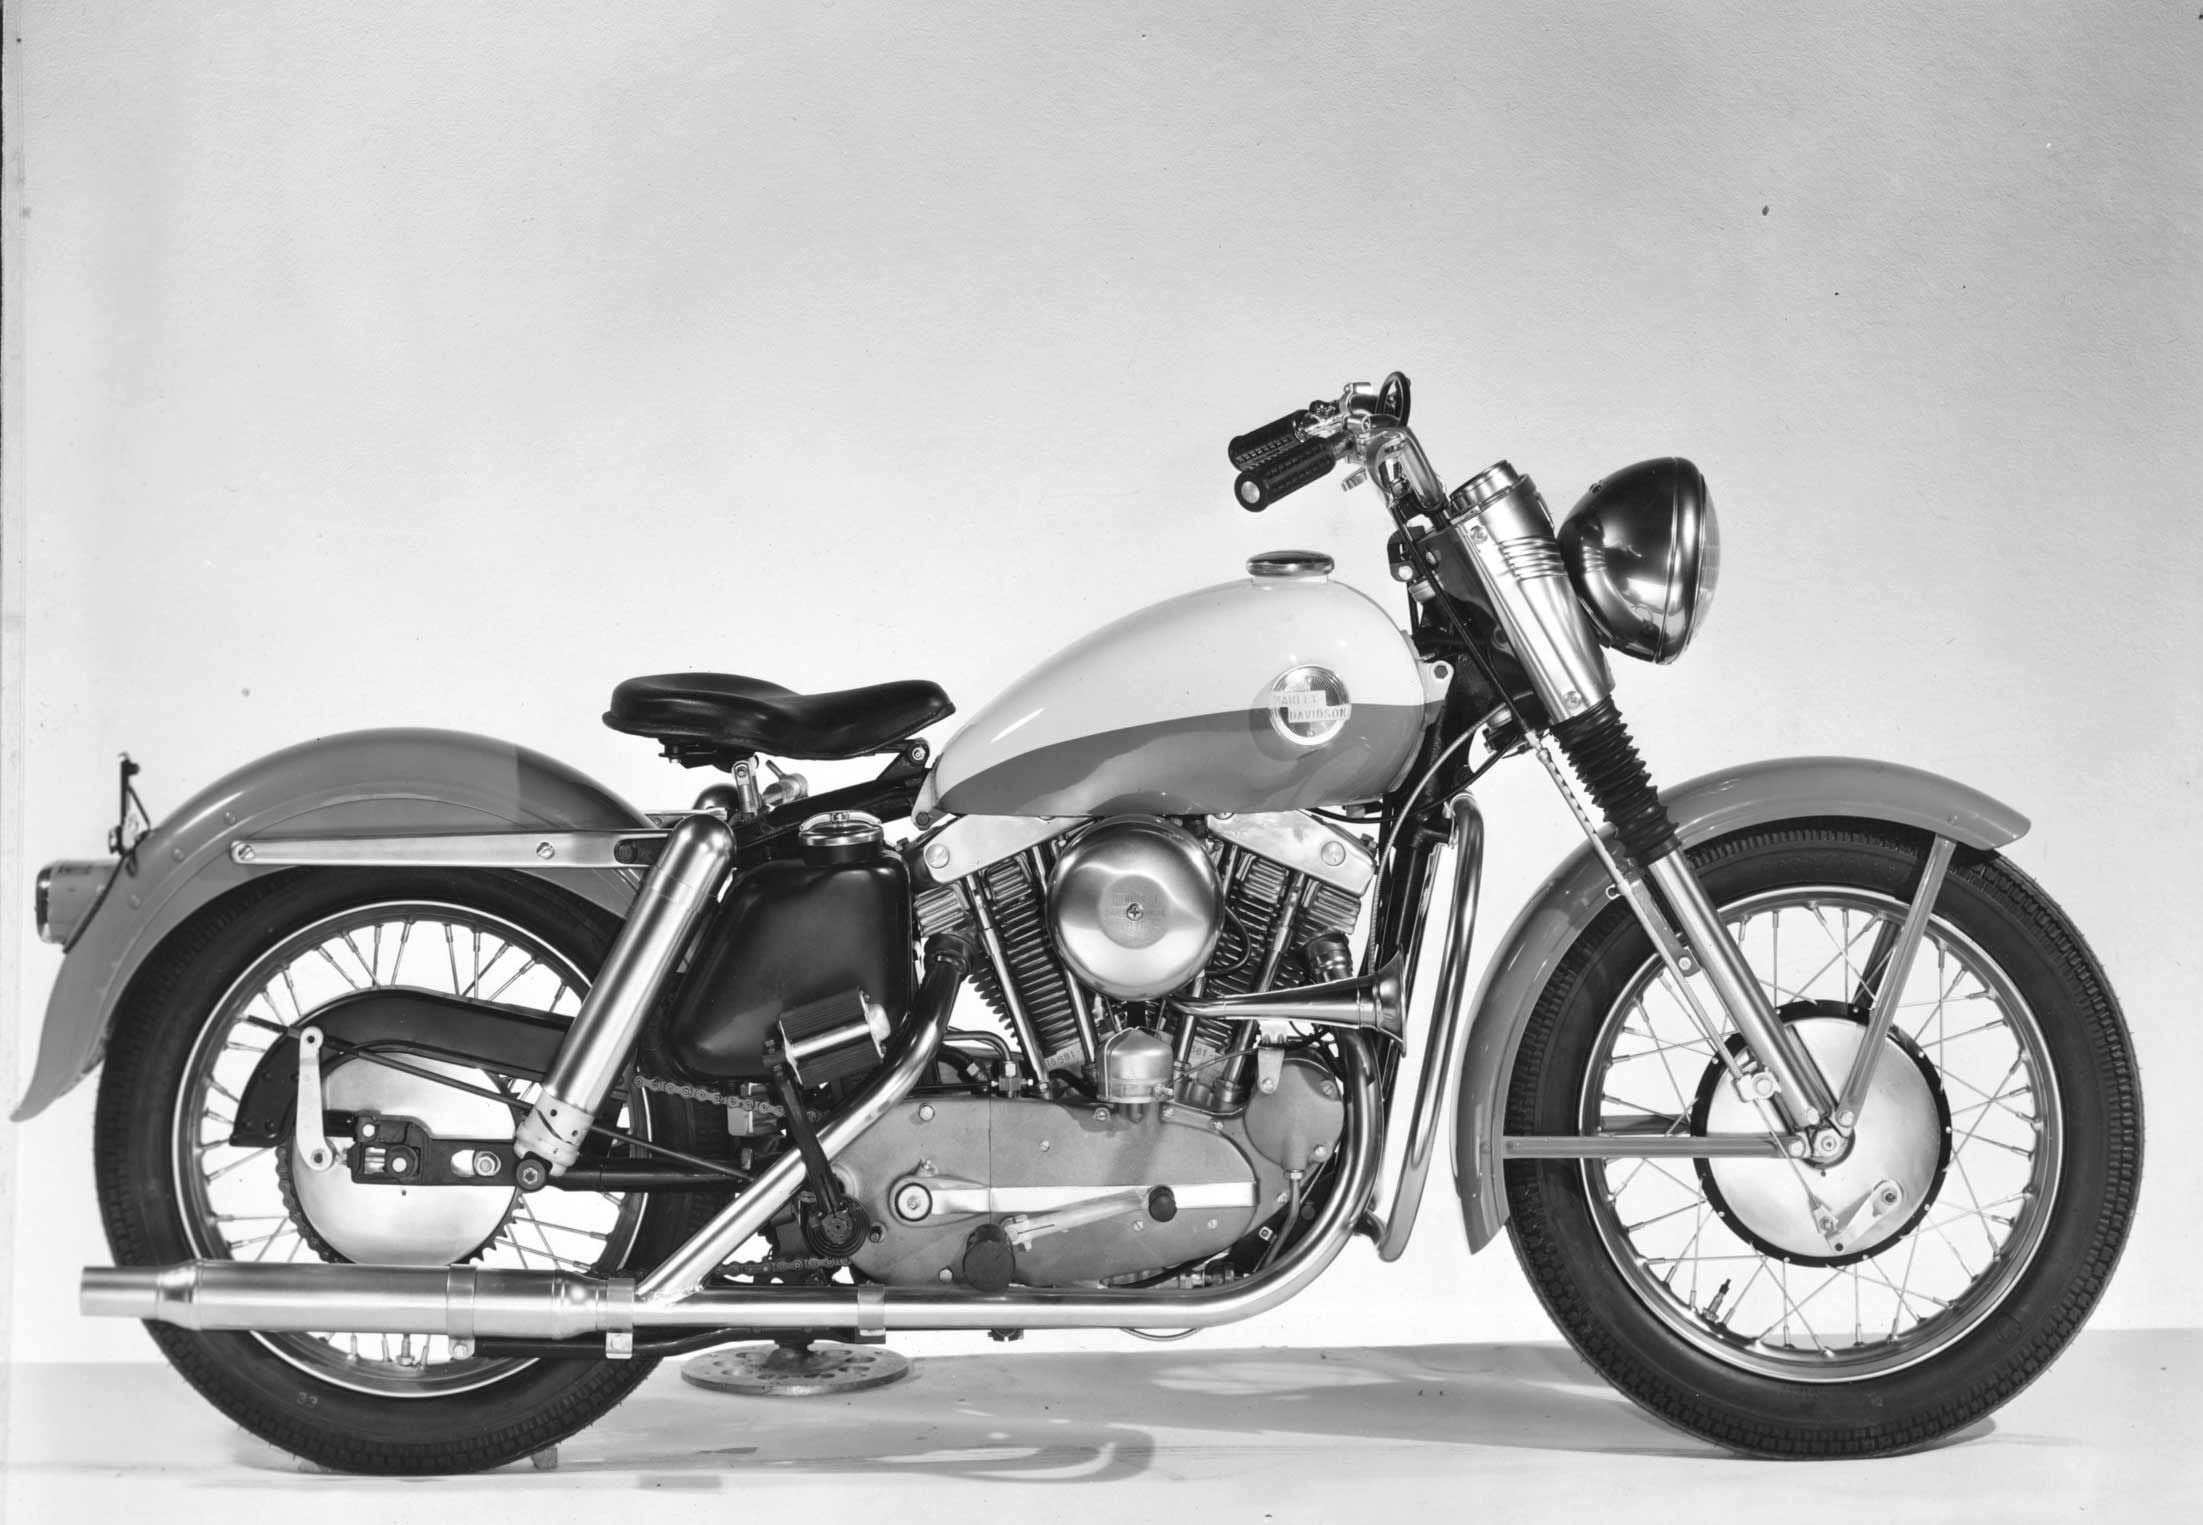 Harley-Davidson’s Sportster was created in 1957 to counter the lighter and faster British twins from BSA, Norton, and Triumph.